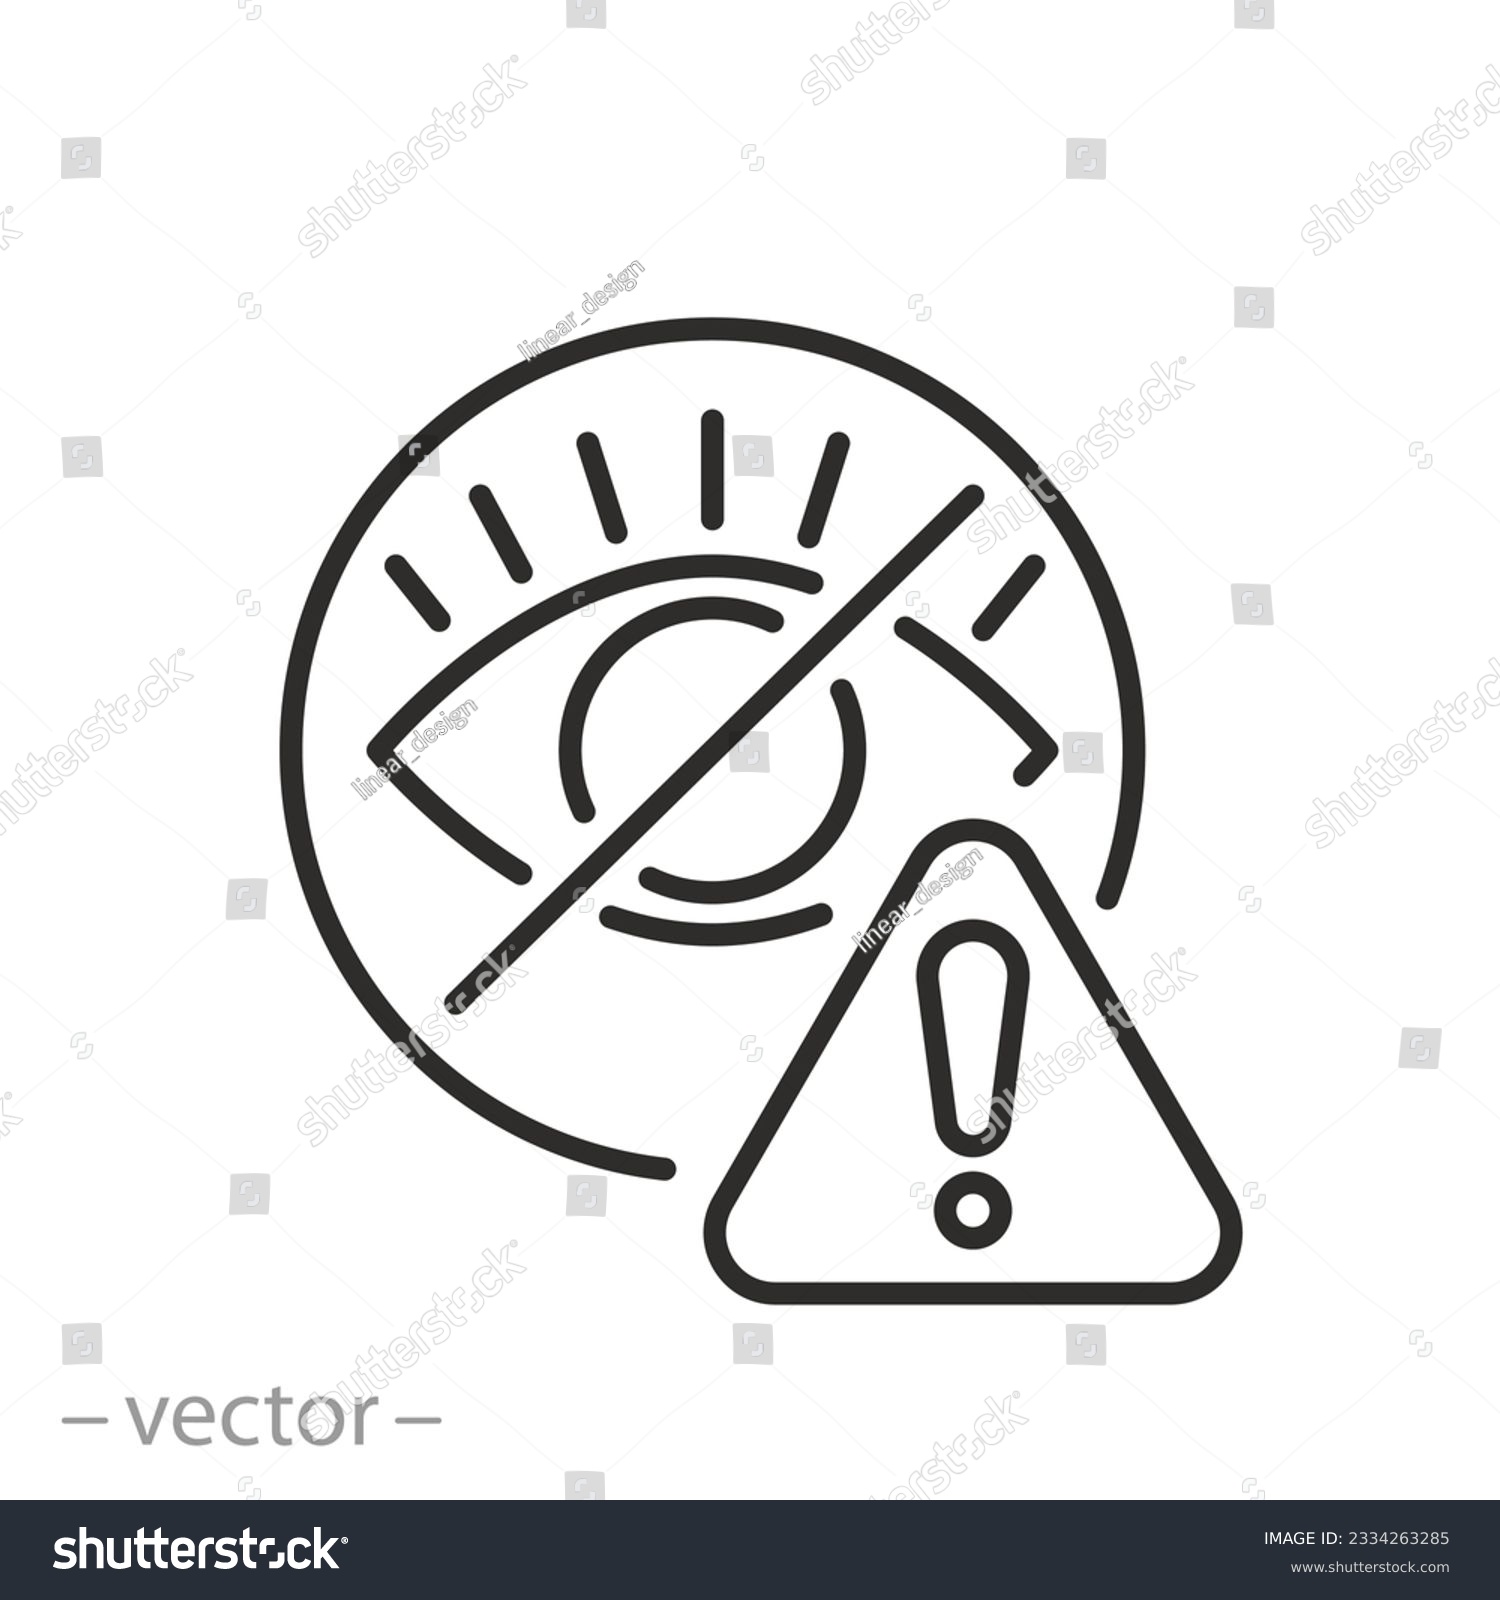 SVG of sensitive content icon, no look, sign attention or warning, eye view ban, prohibited content, thin line symbol - editable stroke vector illustration svg